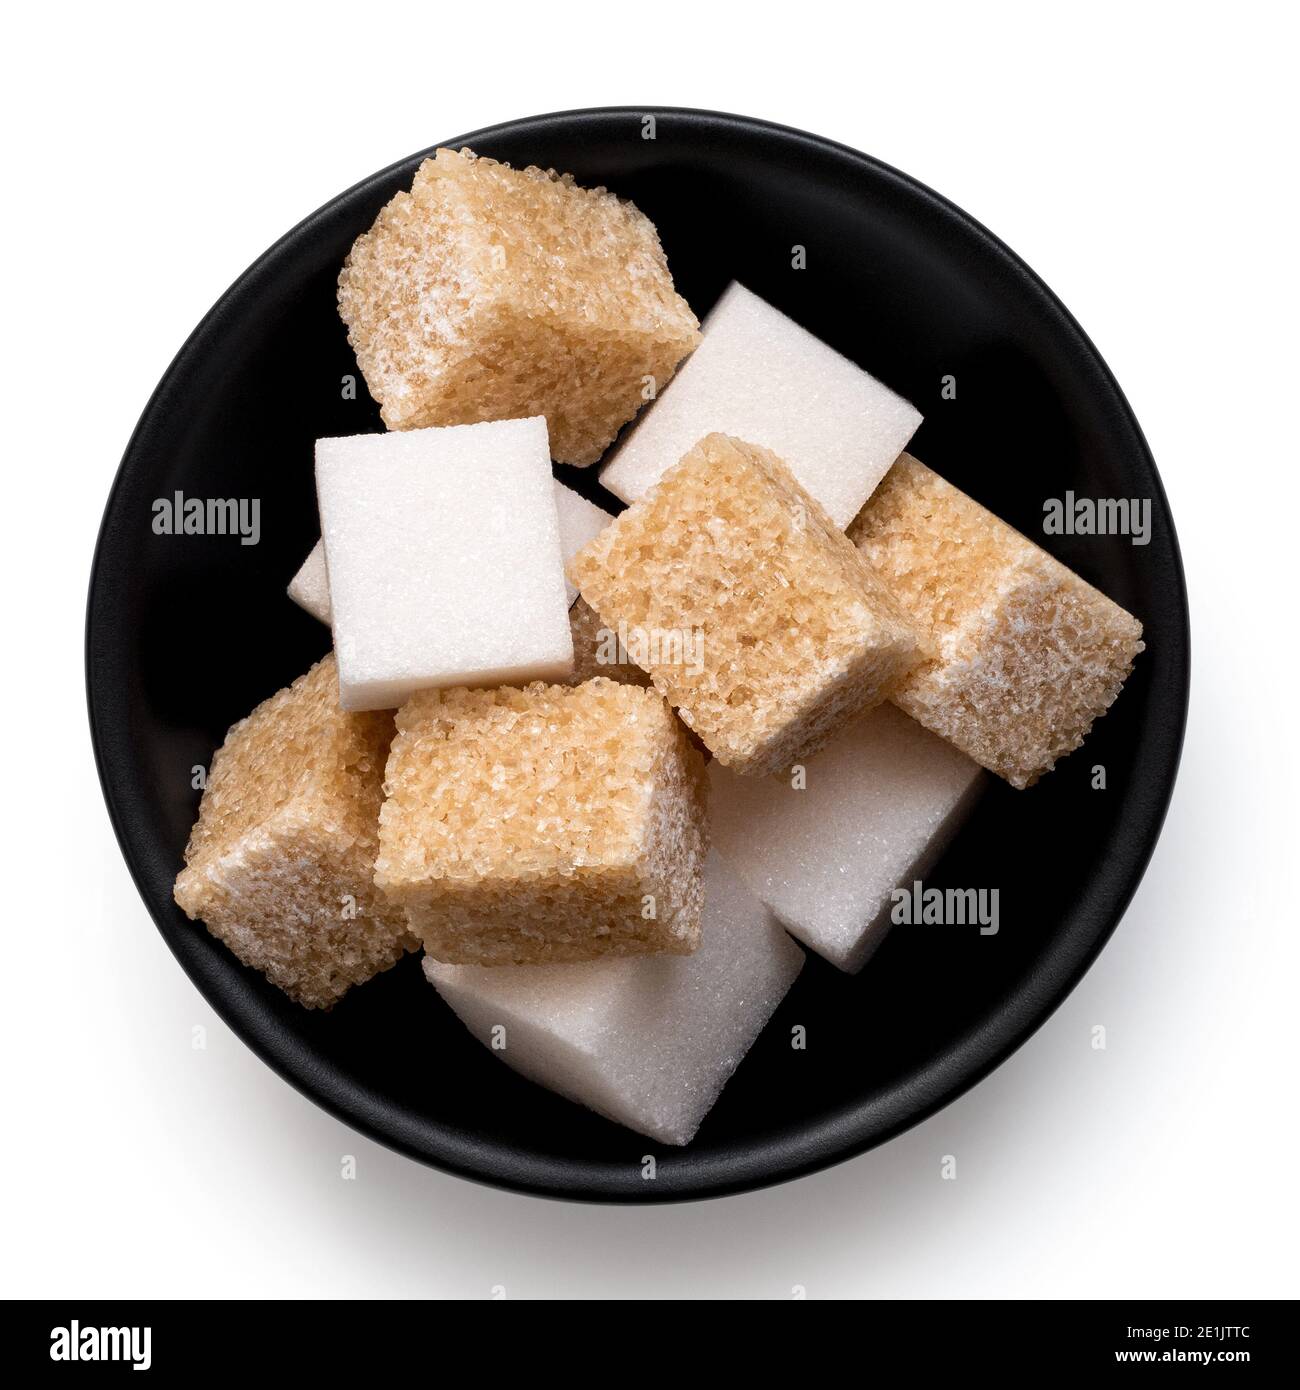 Brown and white sugar cubes in black ceramic bowl isolated on white. Top view. Stock Photo